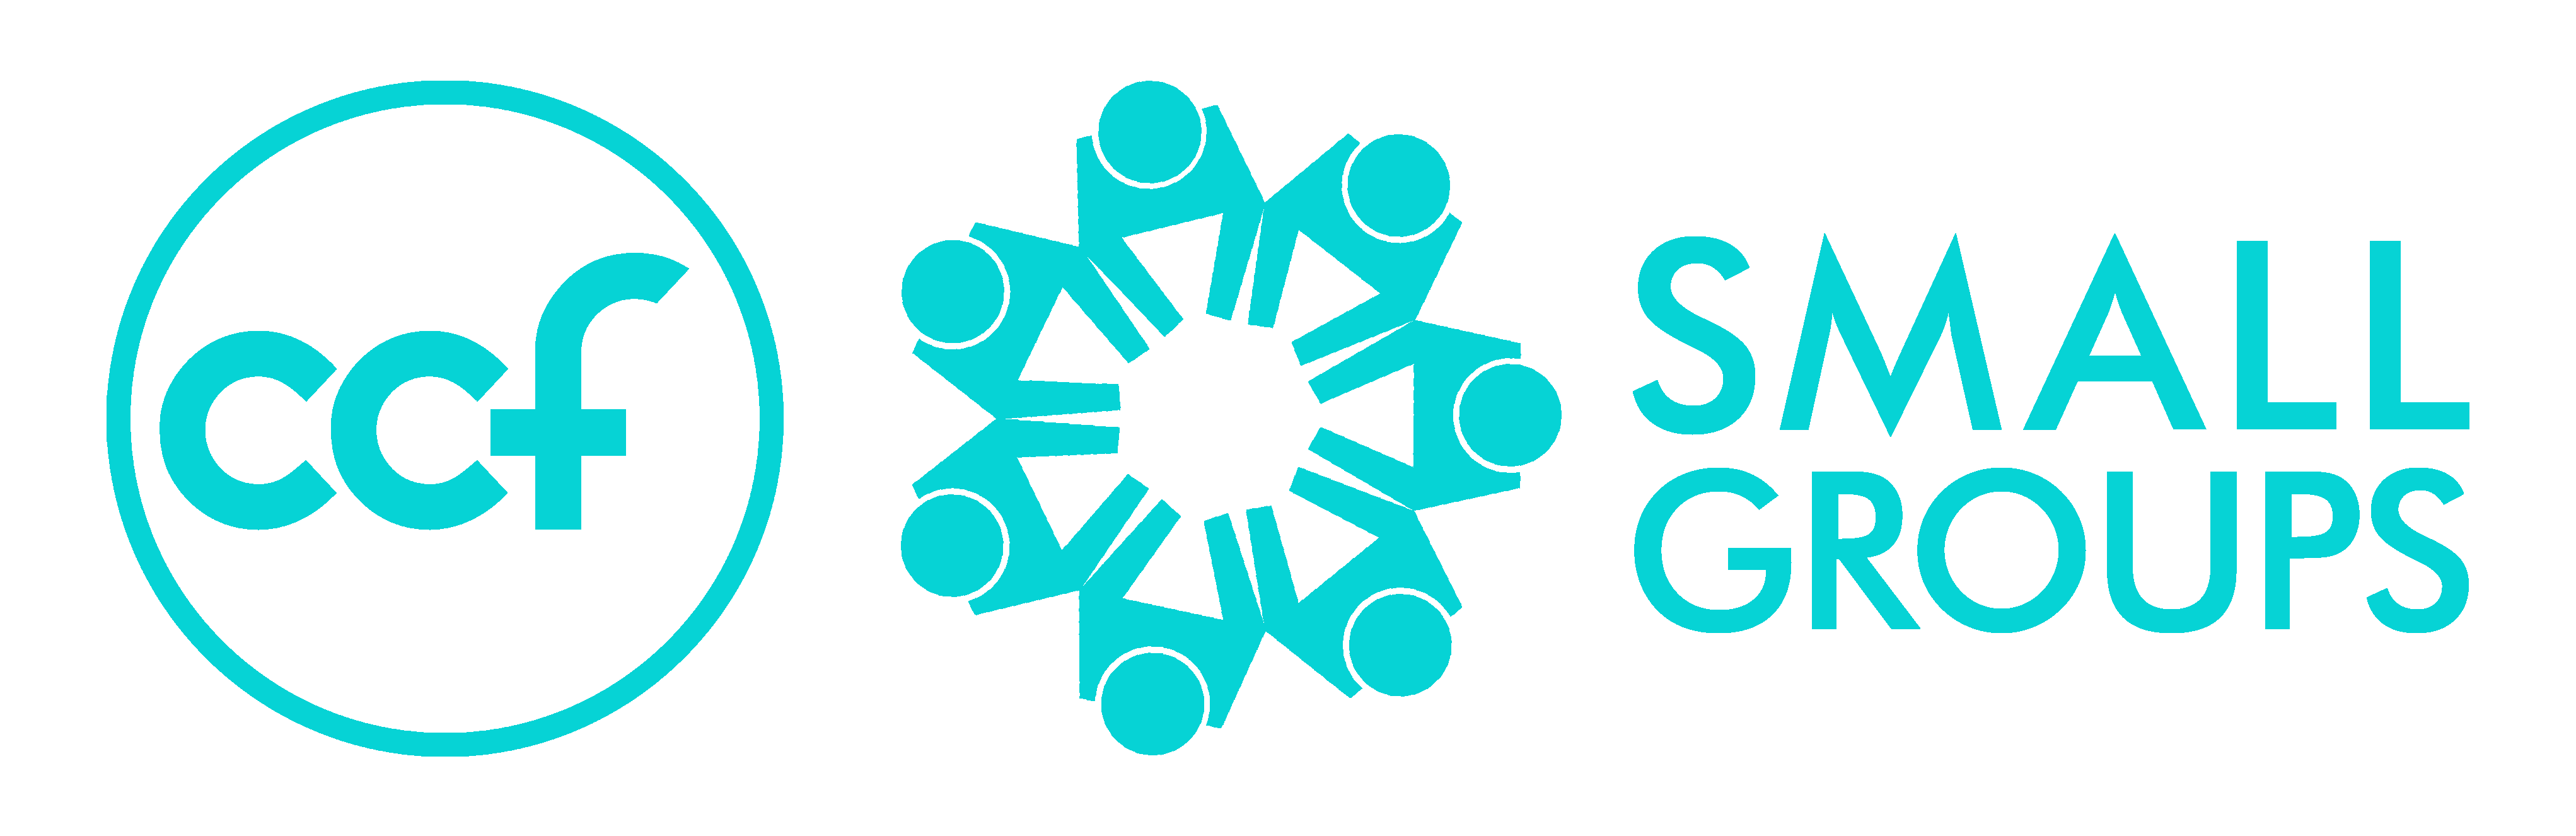 Small Group Logo - CCF Small Groups Logos Teal. Christ's Commission Fellowship. Los